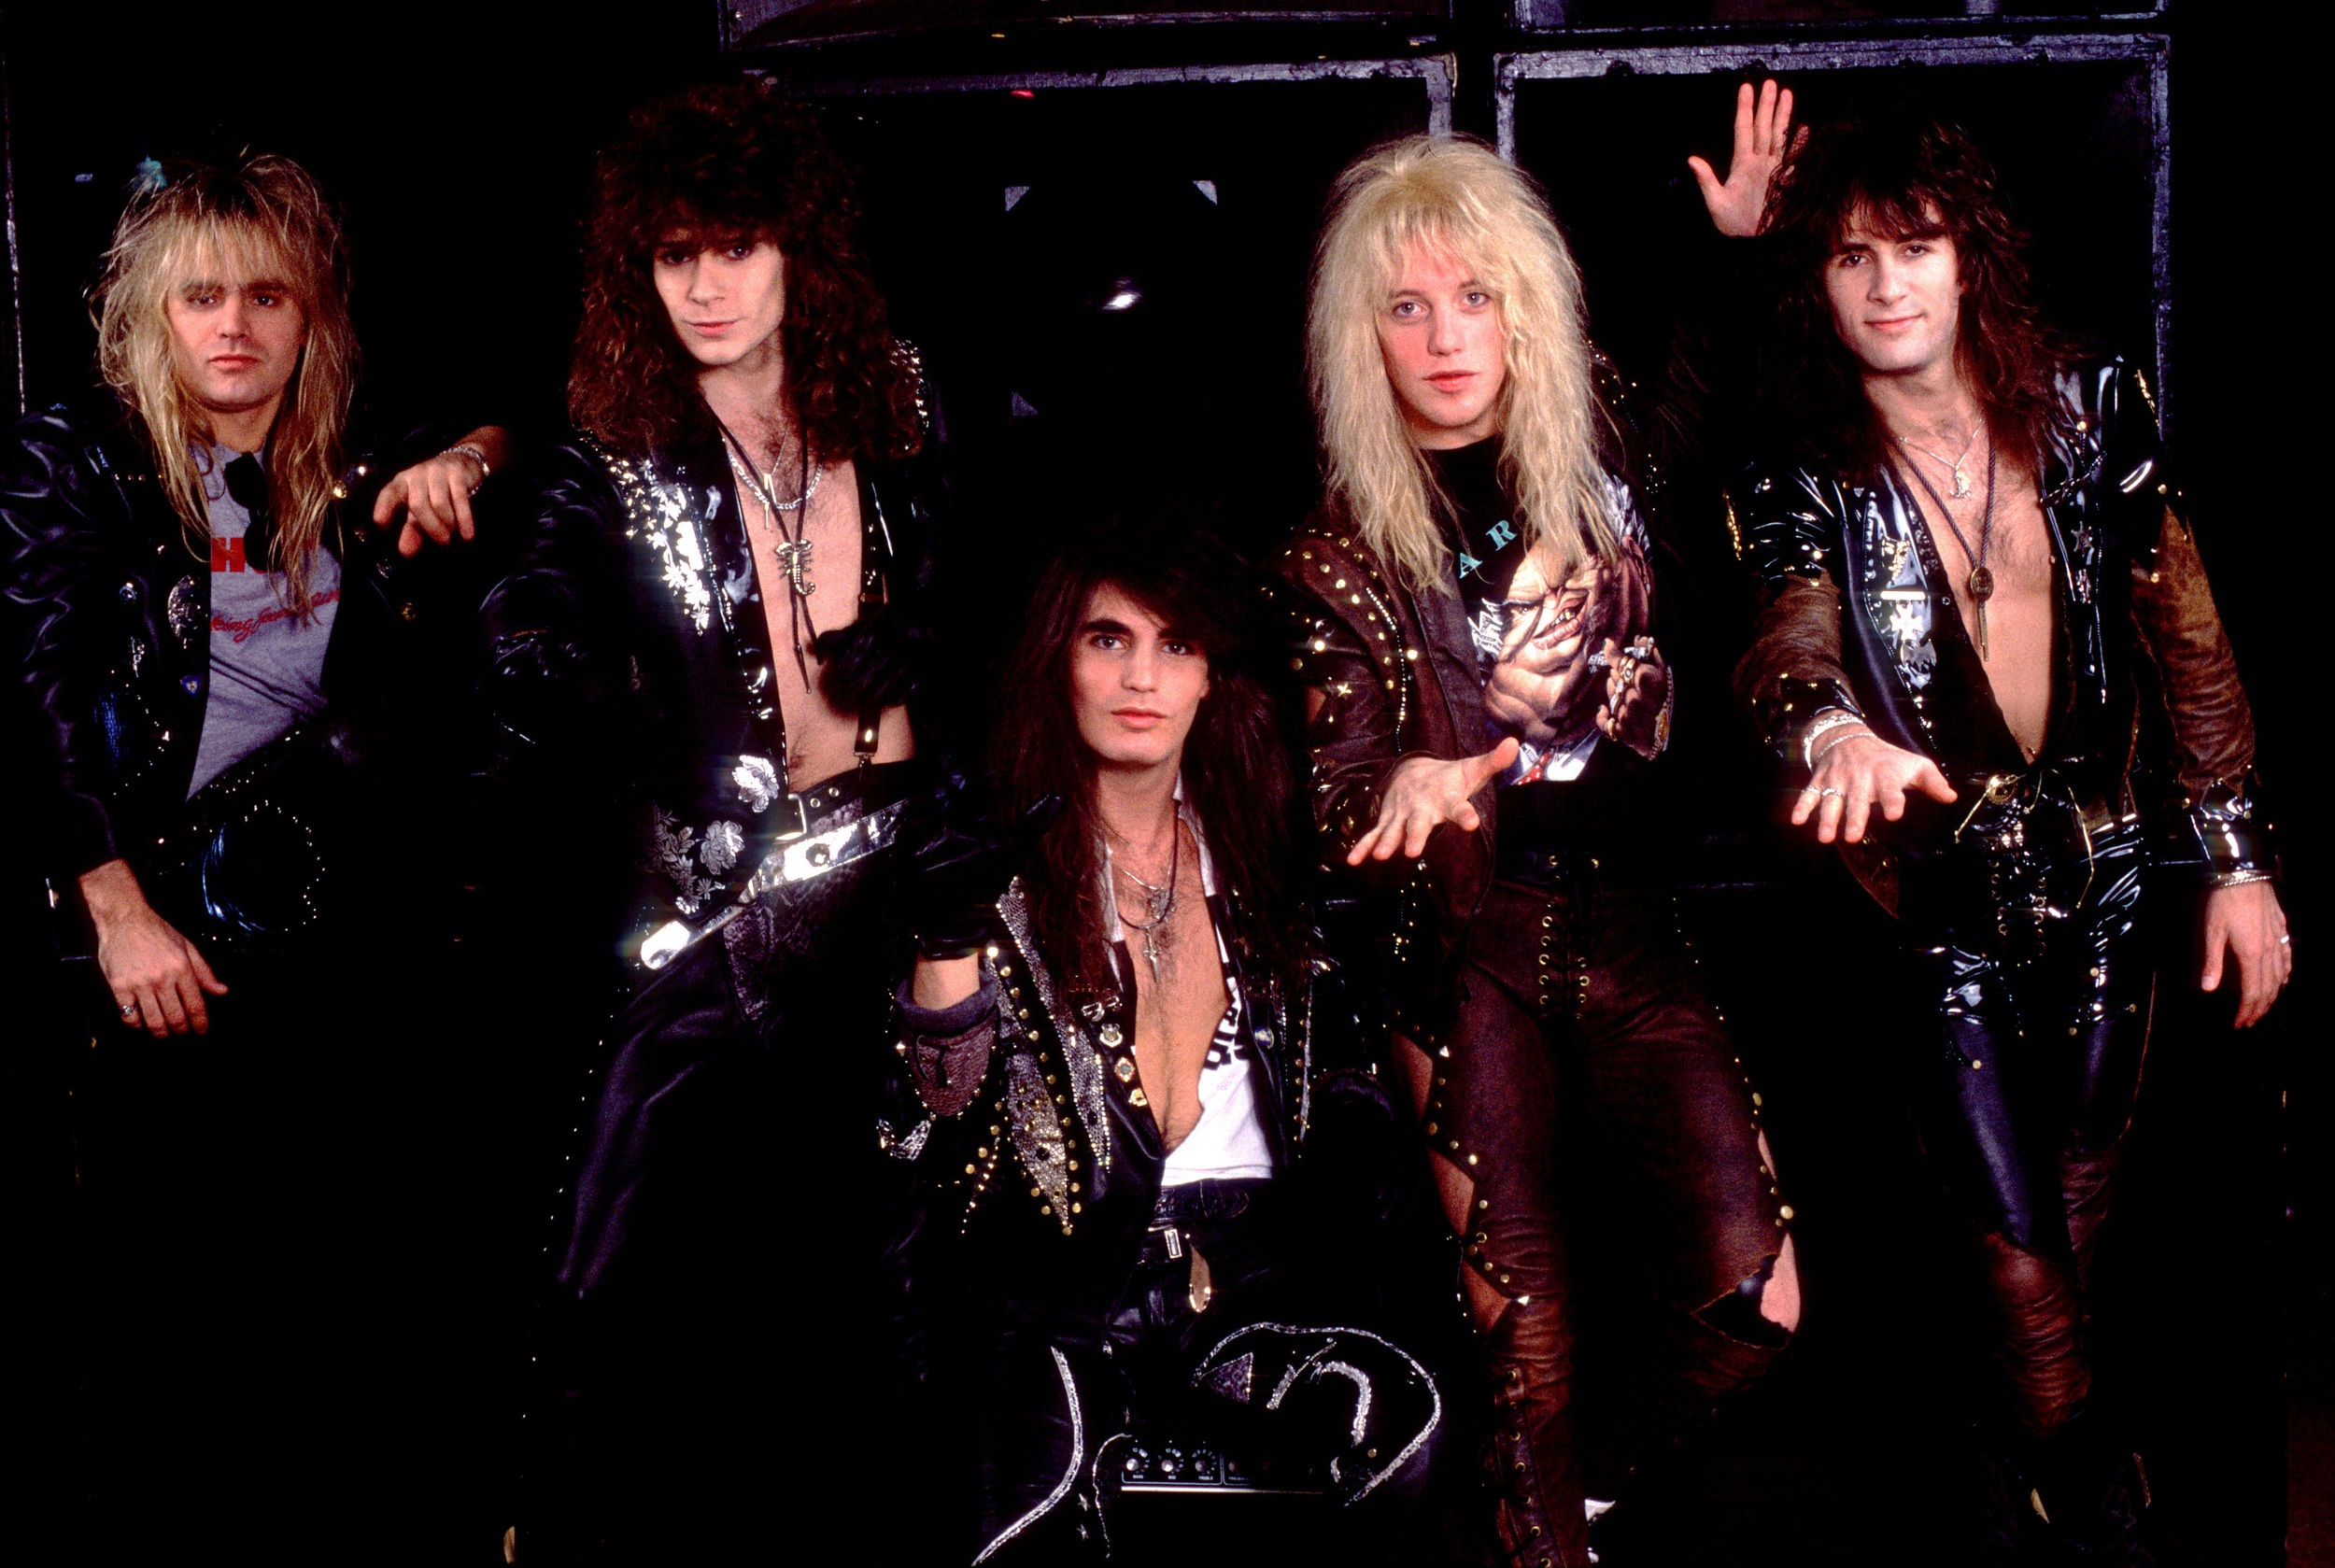 <p>Another band that milked every ounce of MTV's obsession with hair metal, it's almost as if Warrant was the boy band of the movement. <a href="https://www.youtube.com/watch?v=rrSdXtFJG20">Matching outfits with their names on the sleeve</a>, <a href="https://www.youtube.com/watch?v=0RHENr6Xe70" rel="noopener noreferrer">choreographed moves</a>, and focusing on the video and not necessarily the song. Come on, if there was a song made for MTV, it was 1990's<a href="https://www.youtube.com/watch?v=OjyZKfdwlng"> "Cherry Pie."</a> Give the band credit. Warrant knew how to follow a formula, and retro fans still want to hear it.  </p><p>You may also like: <a href='https://www.yardbarker.com/entertainment/articles/the_25_most_insufferable_movie_families_011224/s1__29808272'>The 25 most insufferable movie families</a></p>